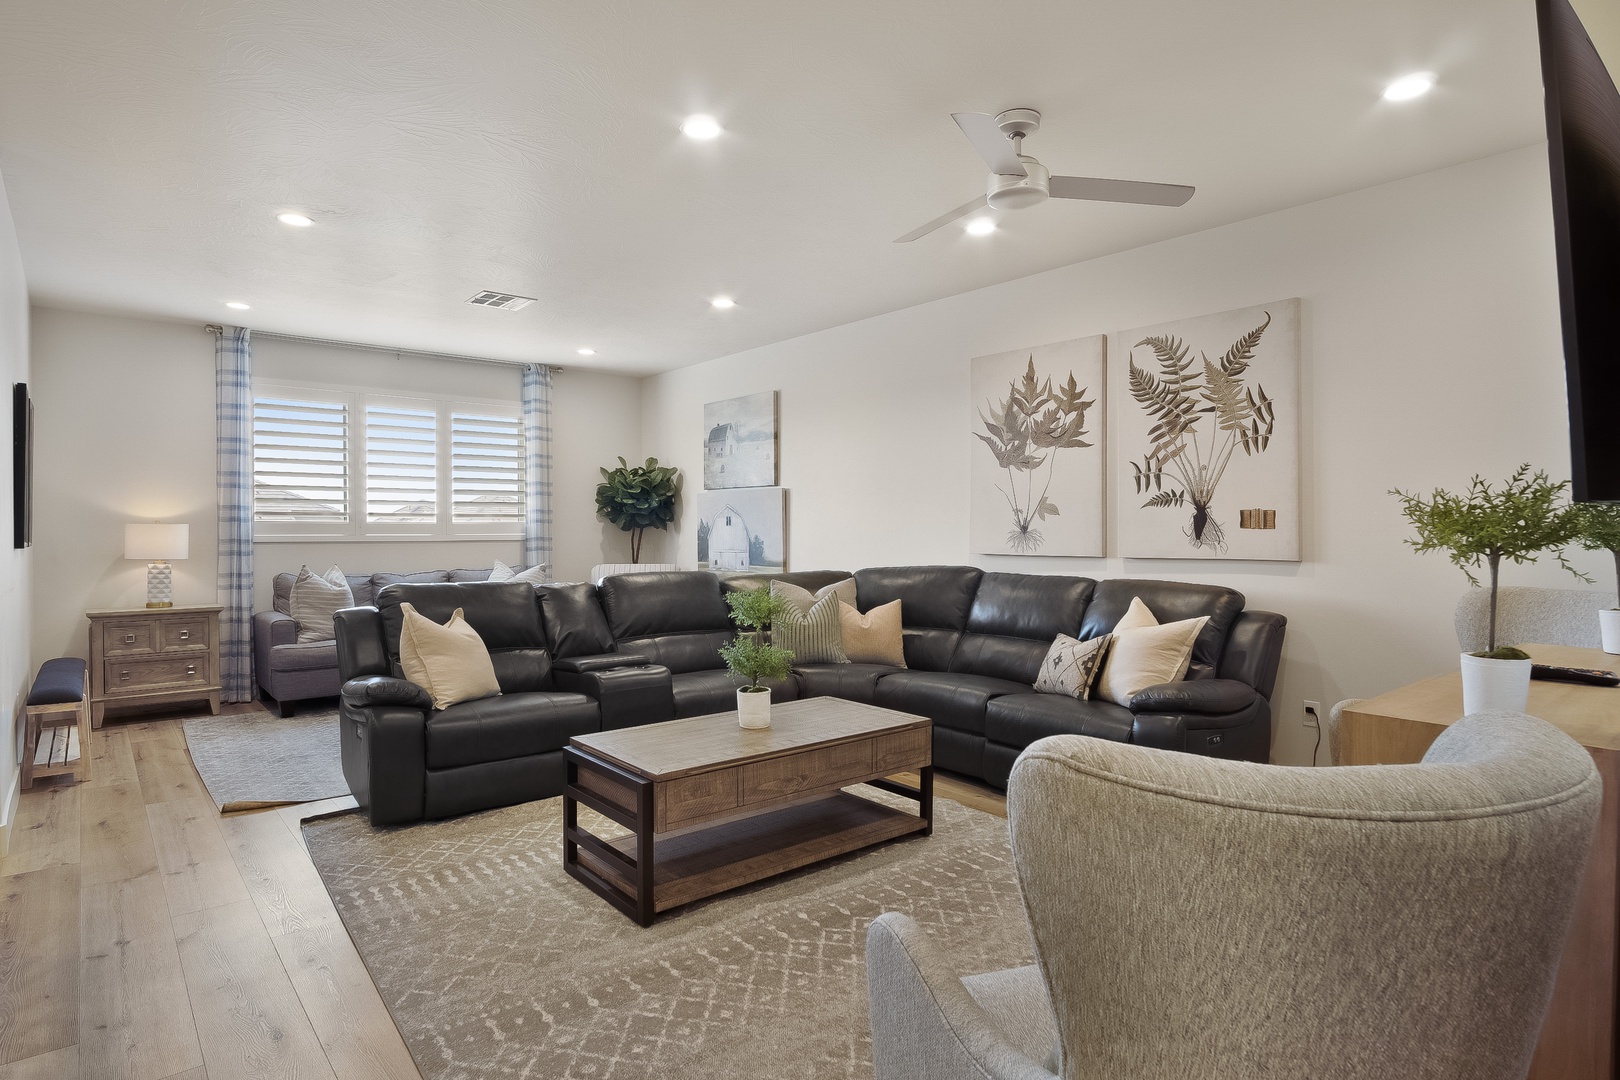 Ample seating for family and friends in the family room